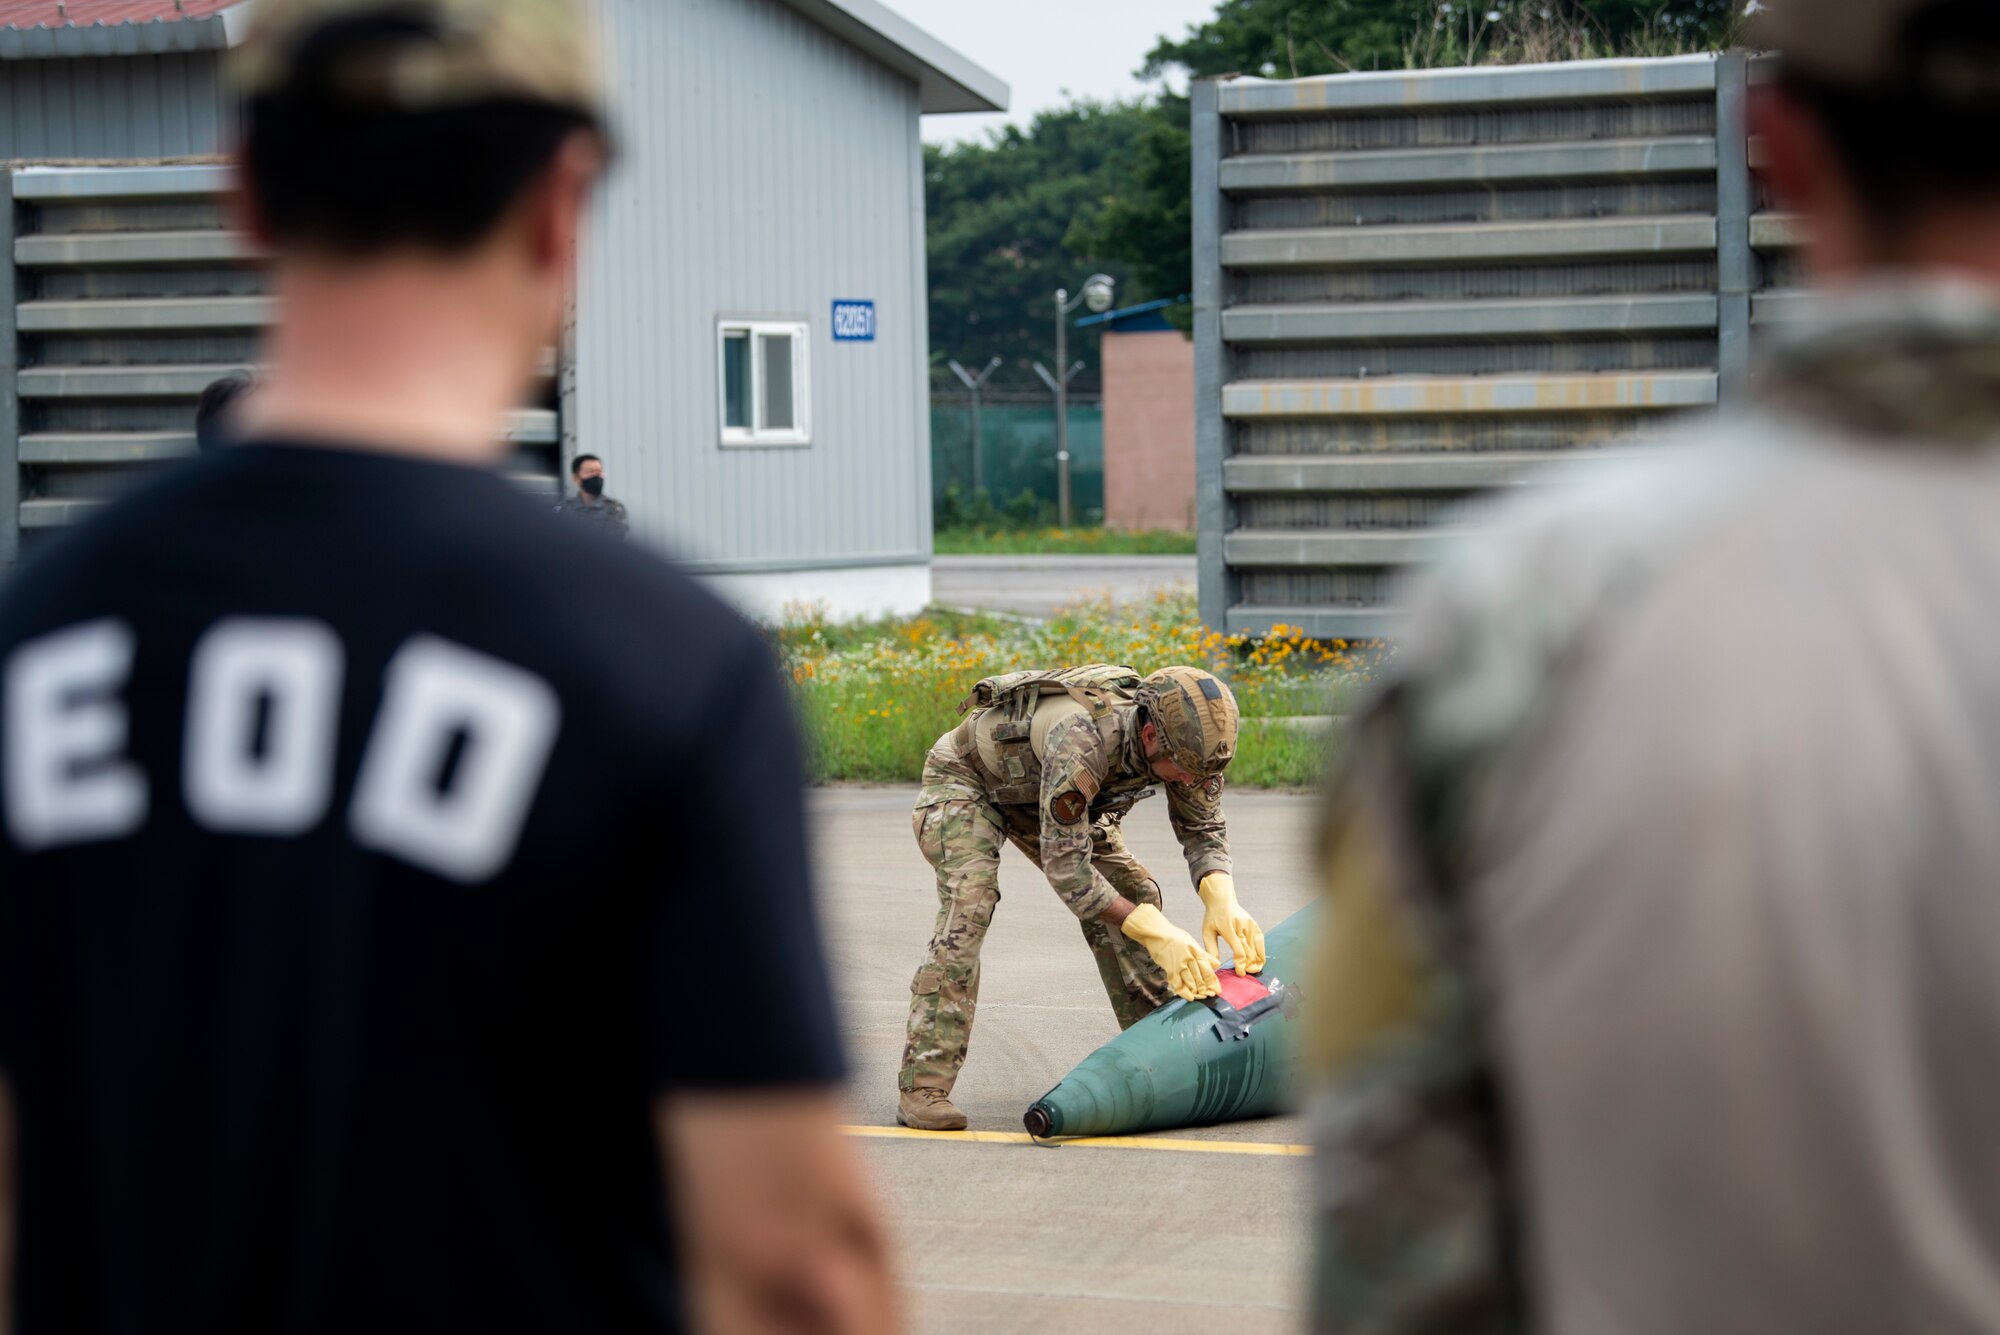 Members of the Republic of Korea Air Force, Explosive Ordnance Disposal team, observe as U.S. Air Force Staff Sgt. Michael Augustus, a 35th Civil Engineer Squadron, Explosive Ordnance Disposal technician from Misawa Air Base, Japan, responds to a mock chemical weapon disposal scenario as part of a bilateral training at Suwon Air Base, Republic of Korea, July 6, 2022